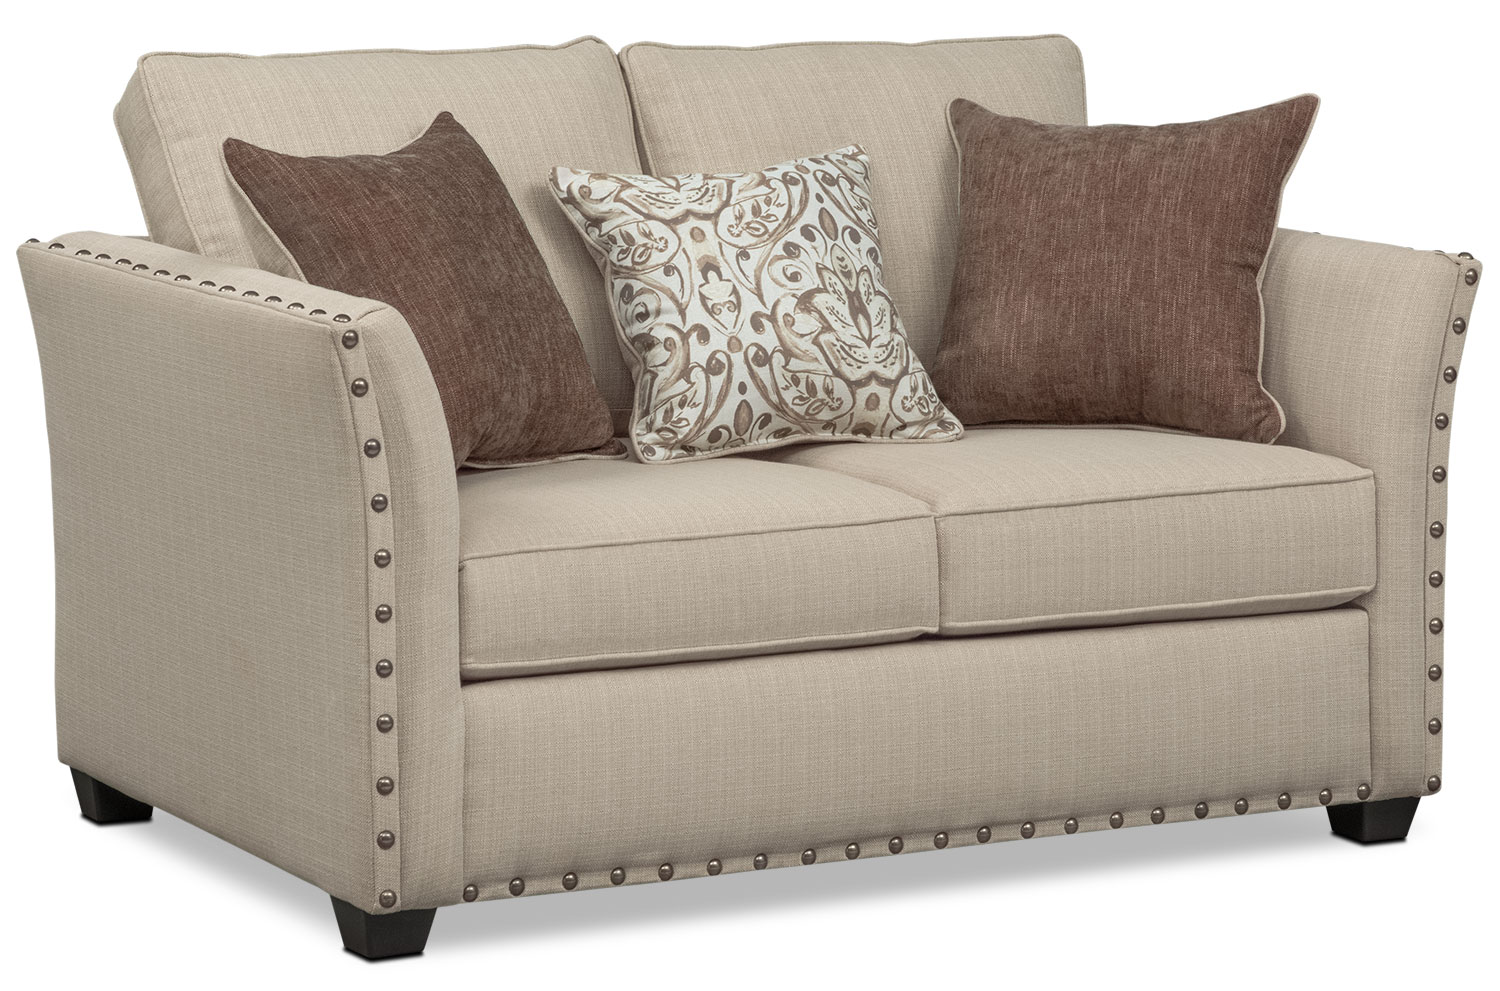 Mckenna Sofa, Loveseat, and Accent Chair Set - Sand | Value City Furniture